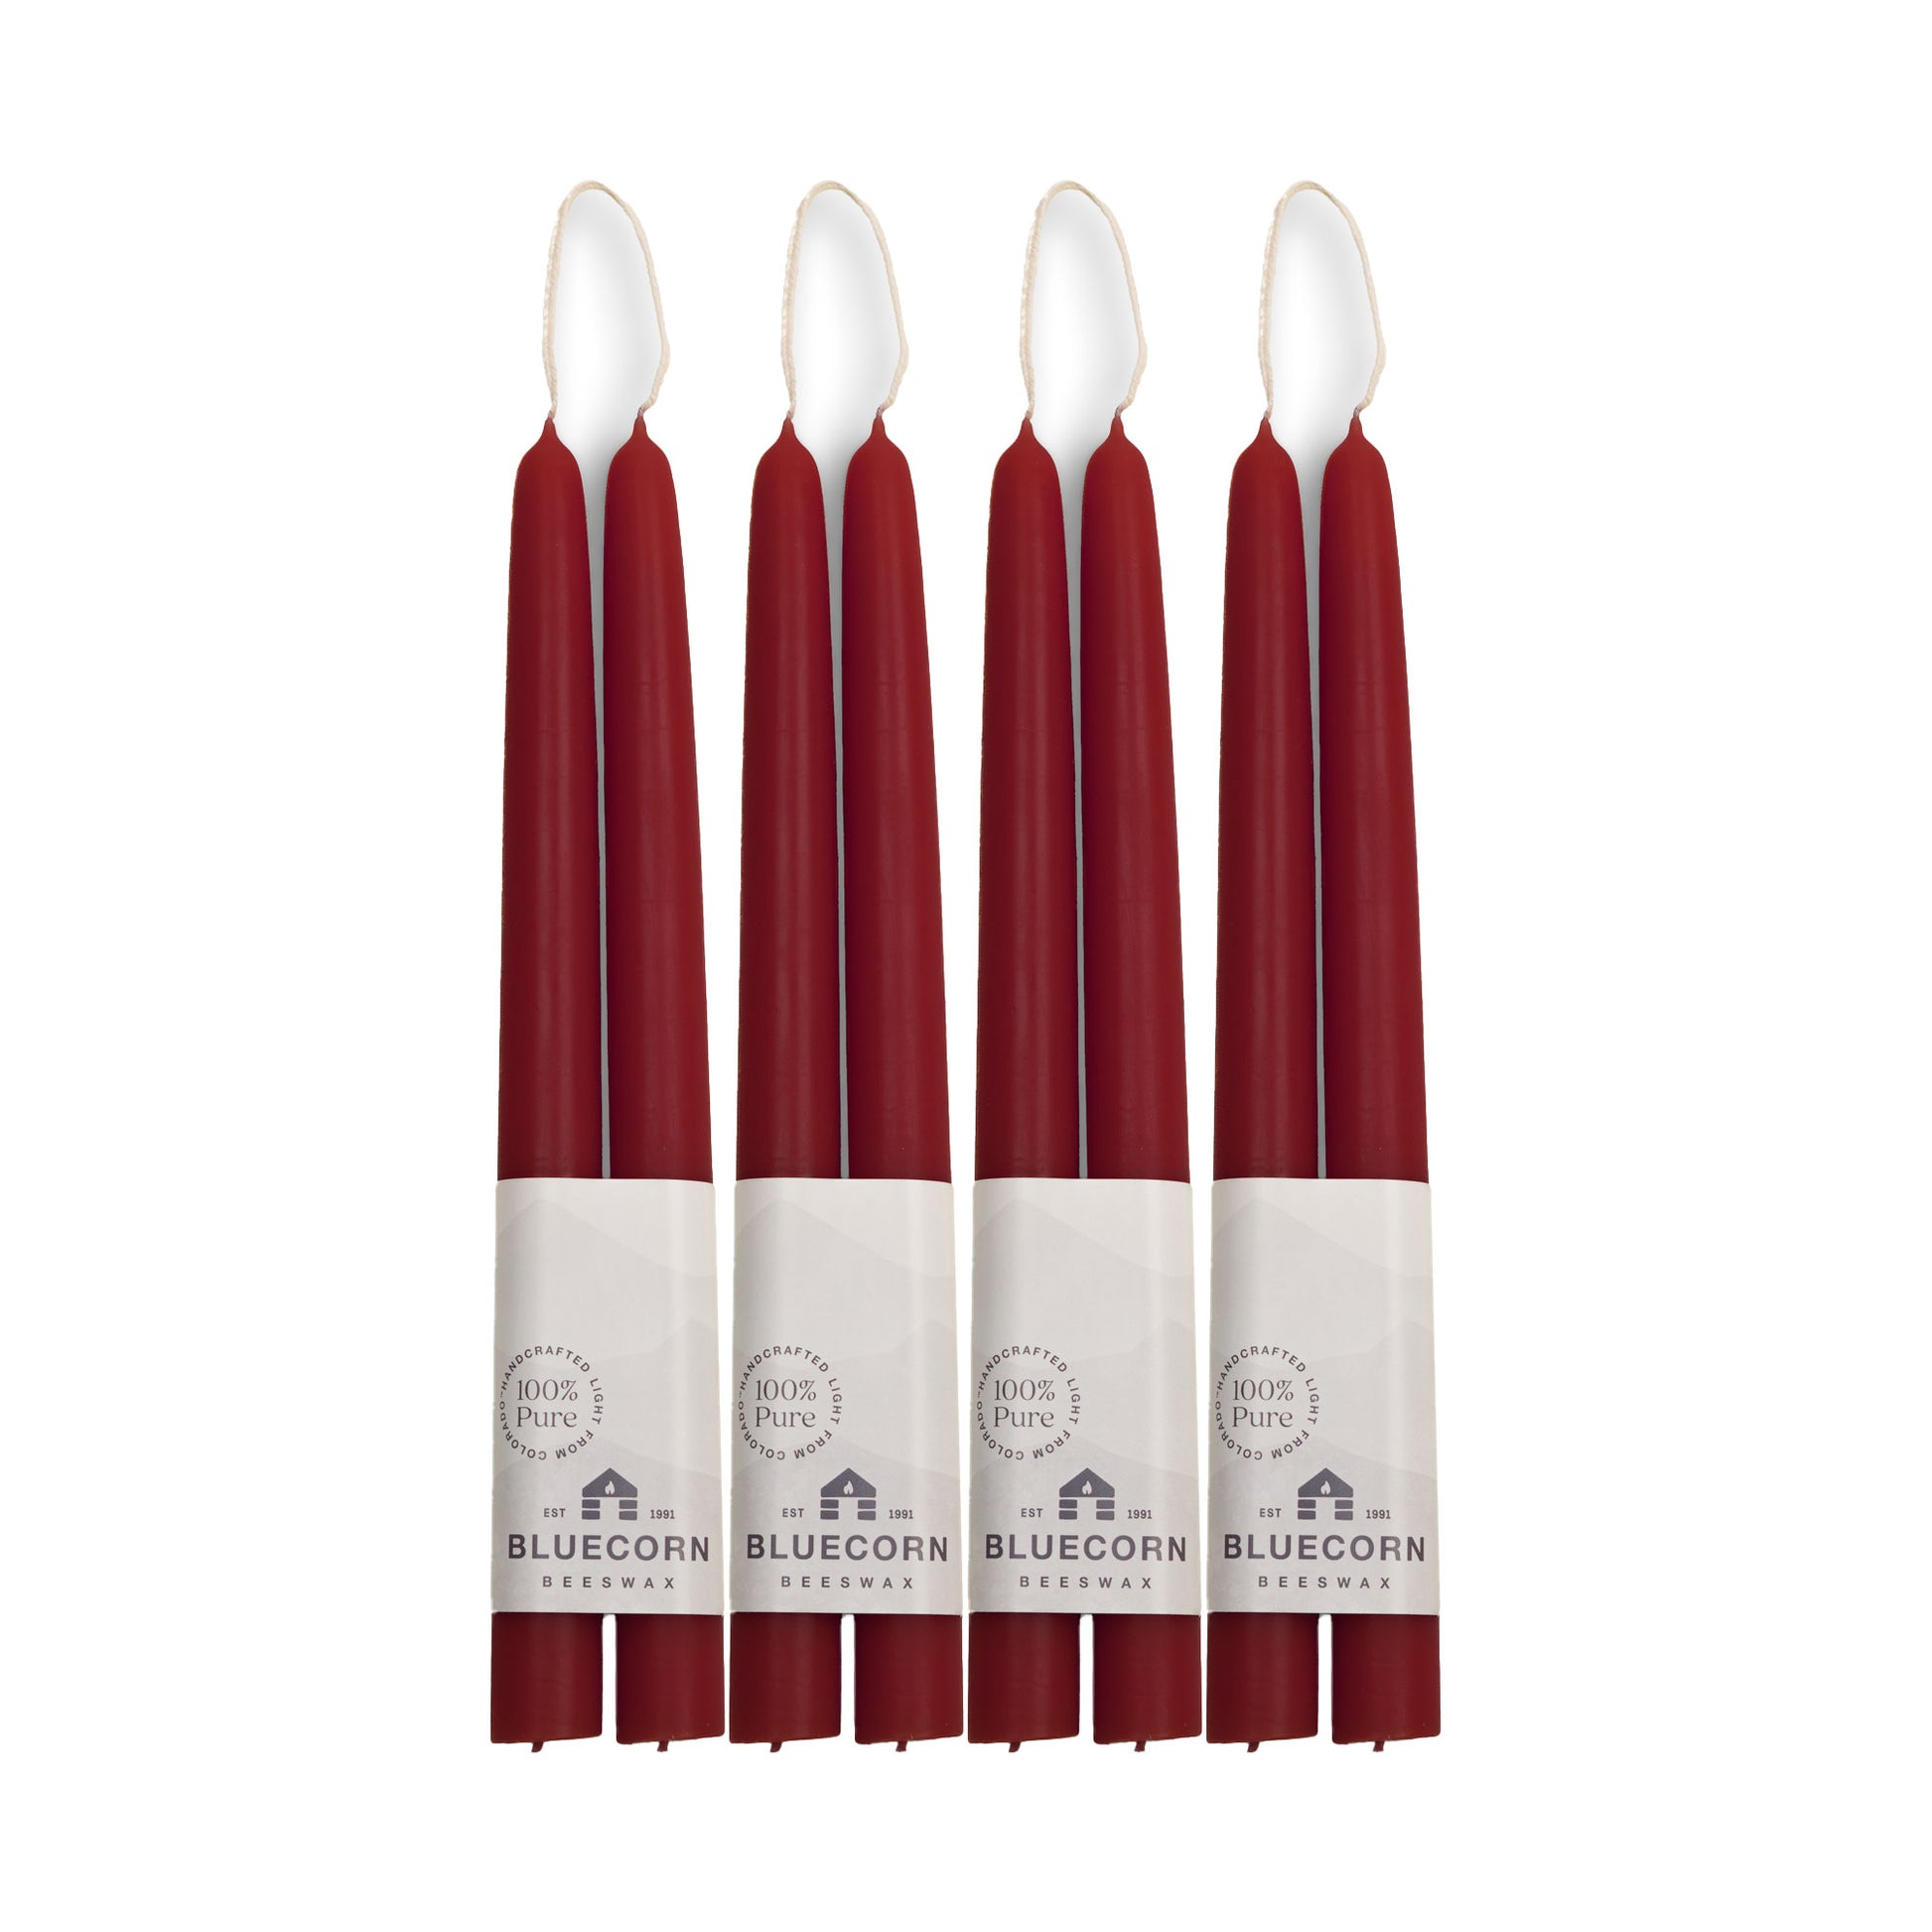 dark red beeswax taper candles from bluecorn candles ideal for christmas and thanksgiving candles